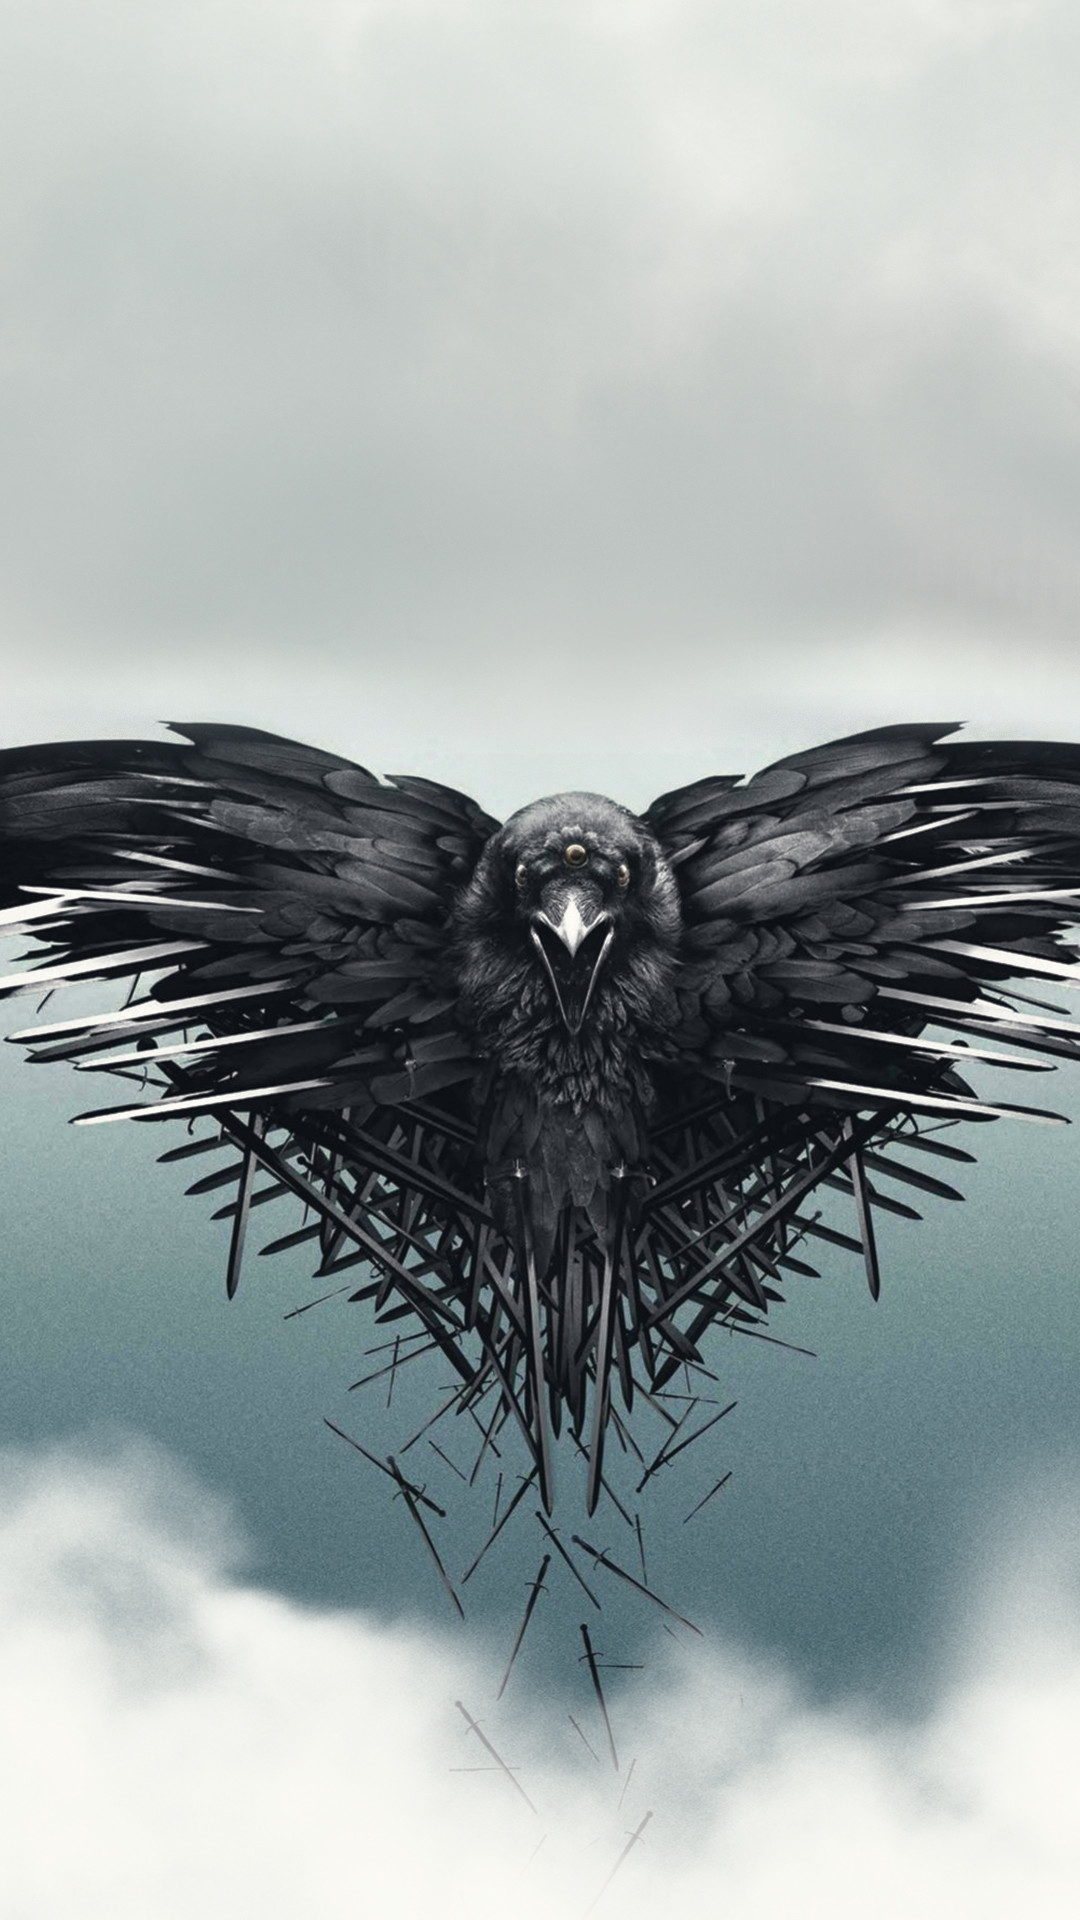 Game of Thrones Wallpaper 1080p (72+ images)